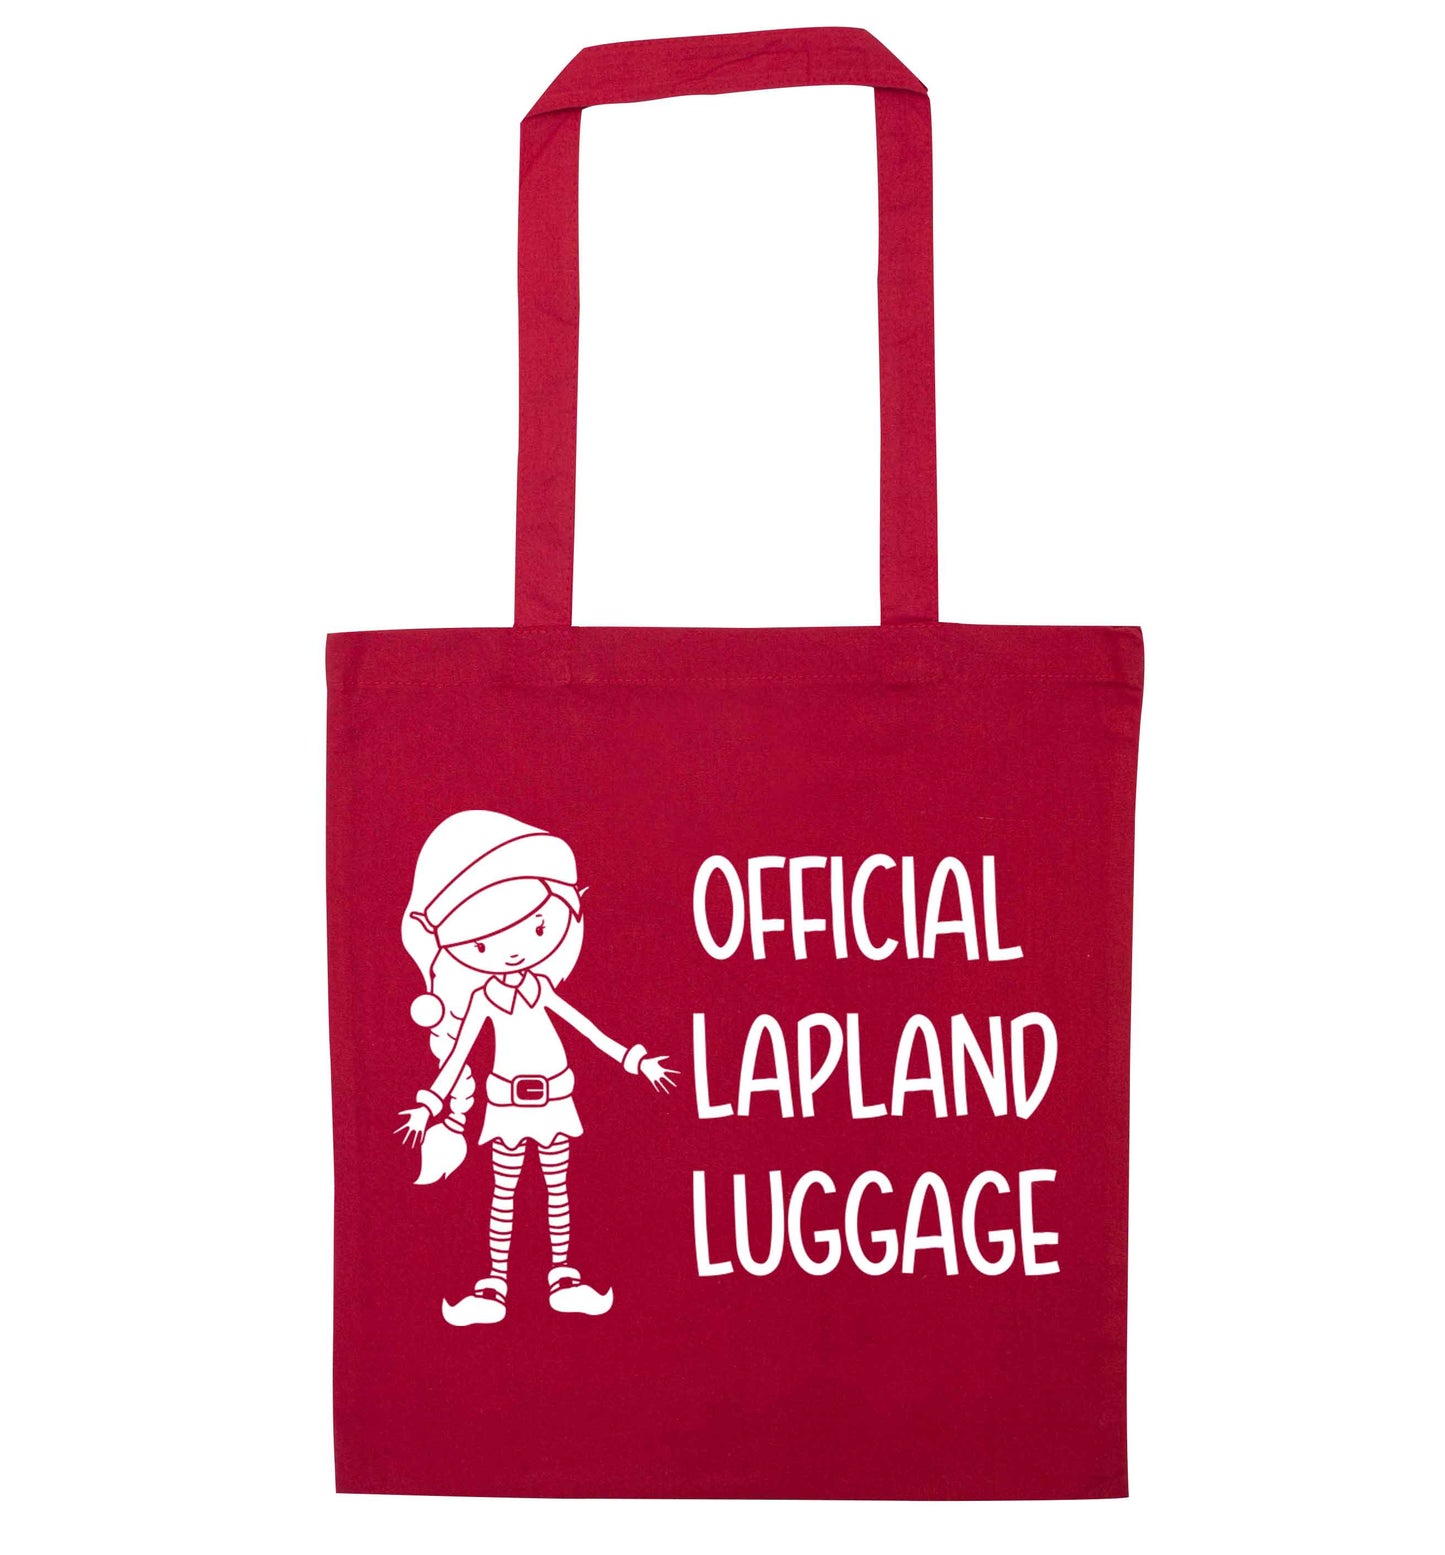 Official lapland luggage - Elf snowflake red tote bag